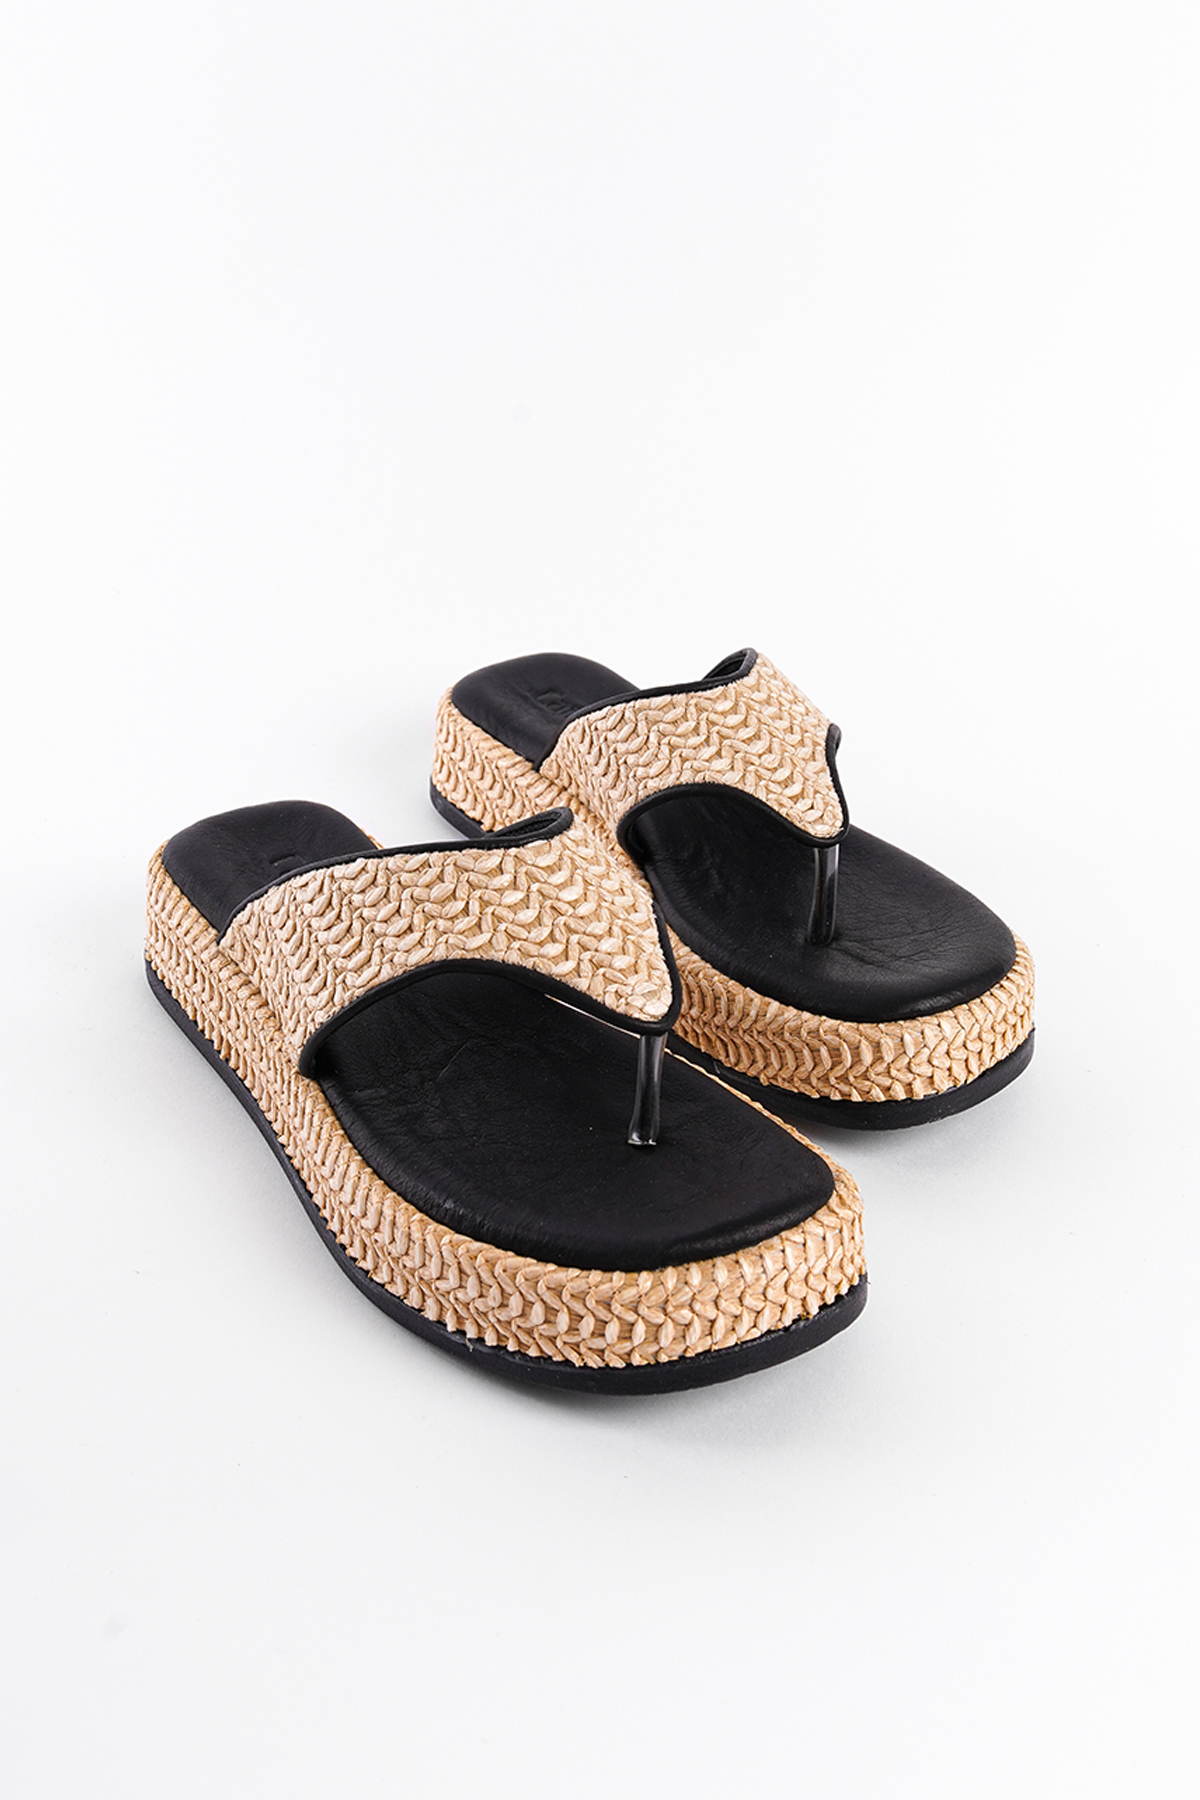 Capone Outfitters Straw Leather Flip Flops Women's Slippers